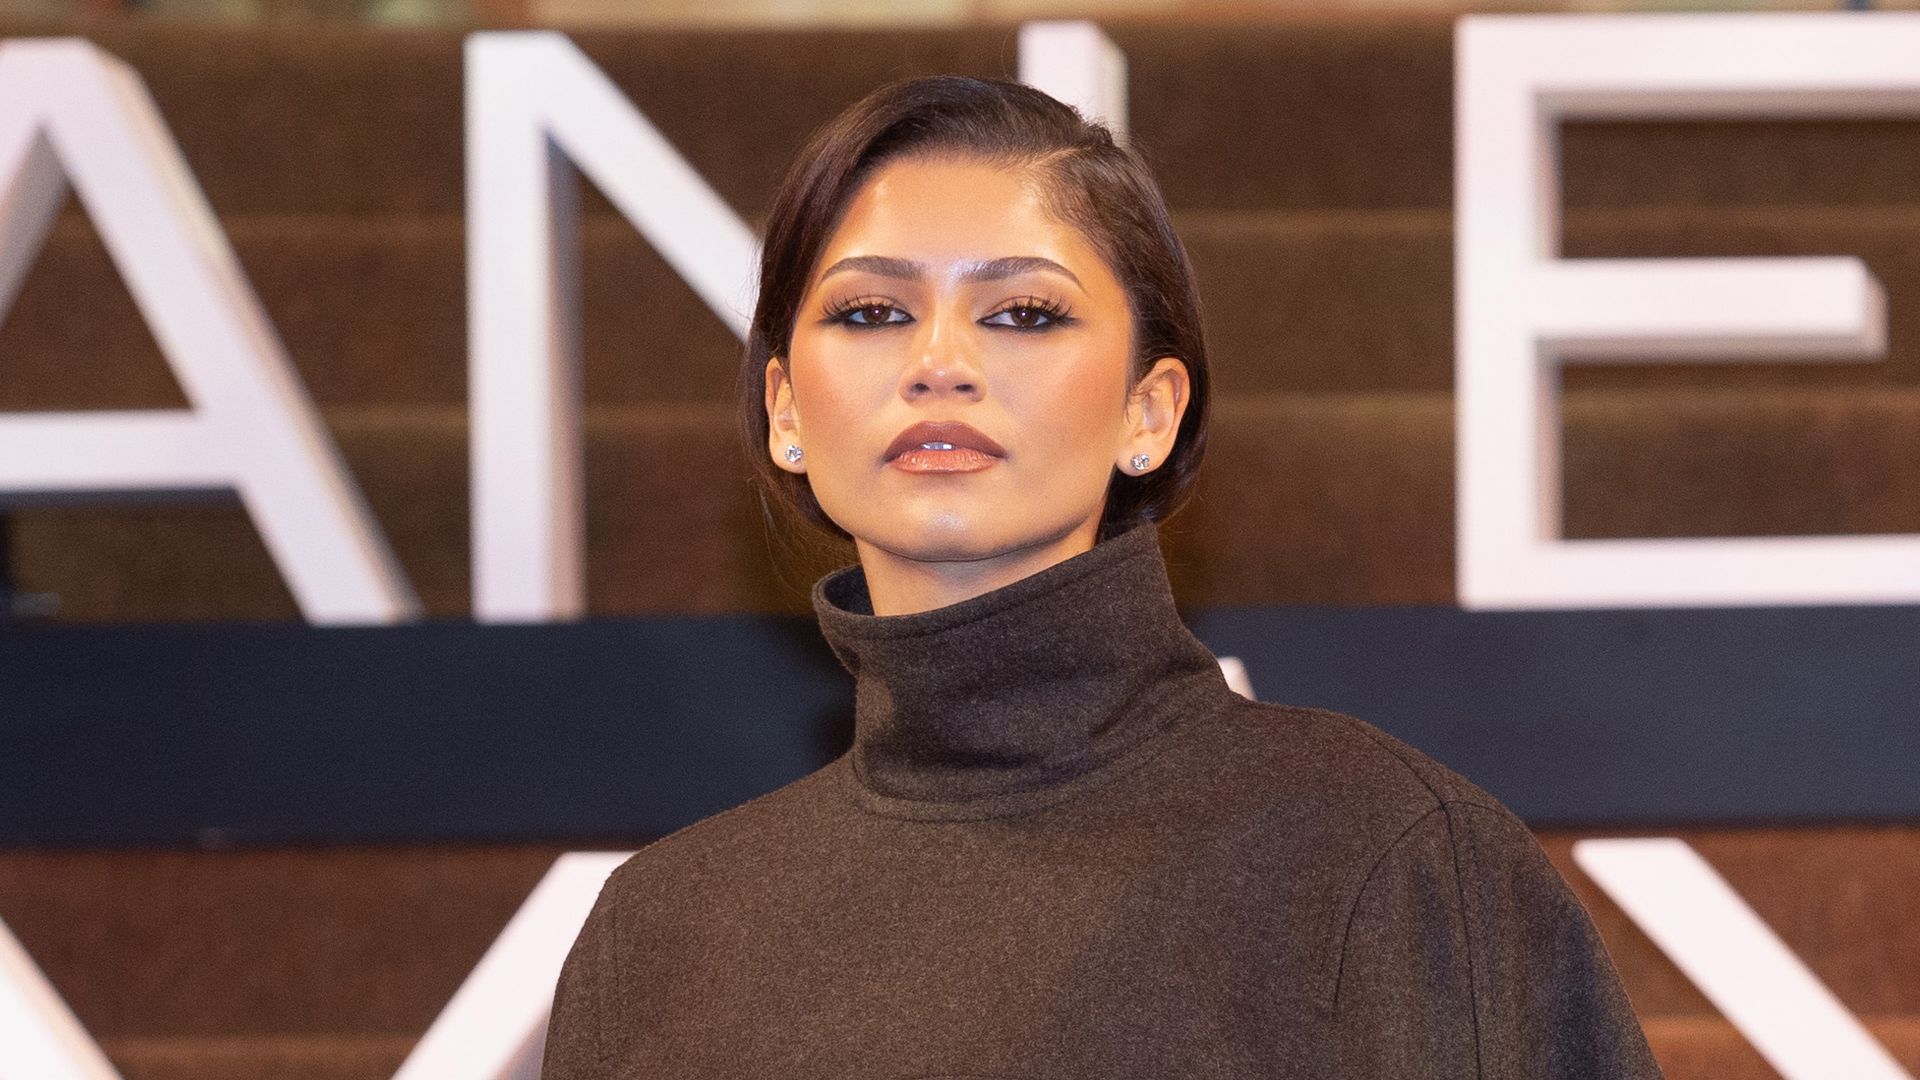 MEXICO CITY, MEXICO - FEBRUARY 6: Zendaya poses for photos during the red carpet for the movie 'Dune: Part Two' at Auditorio Nacional on February 6, 2024 in Mexico City, Mexico. (Photo by Medios y Media/Getty Images)